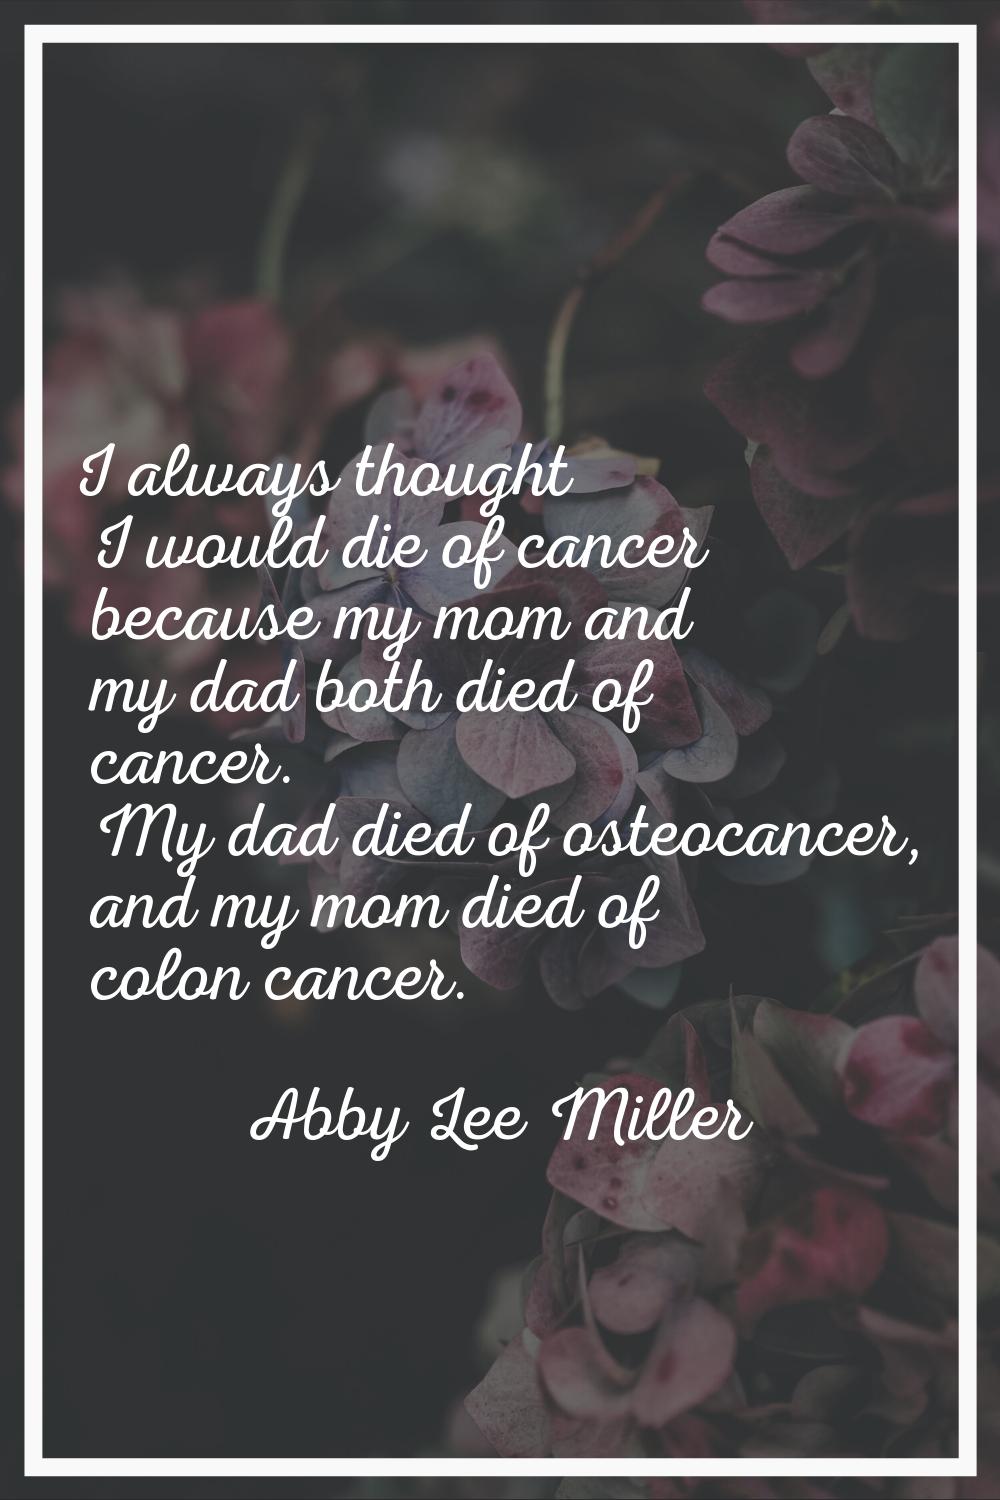 I always thought I would die of cancer because my mom and my dad both died of cancer. My dad died o